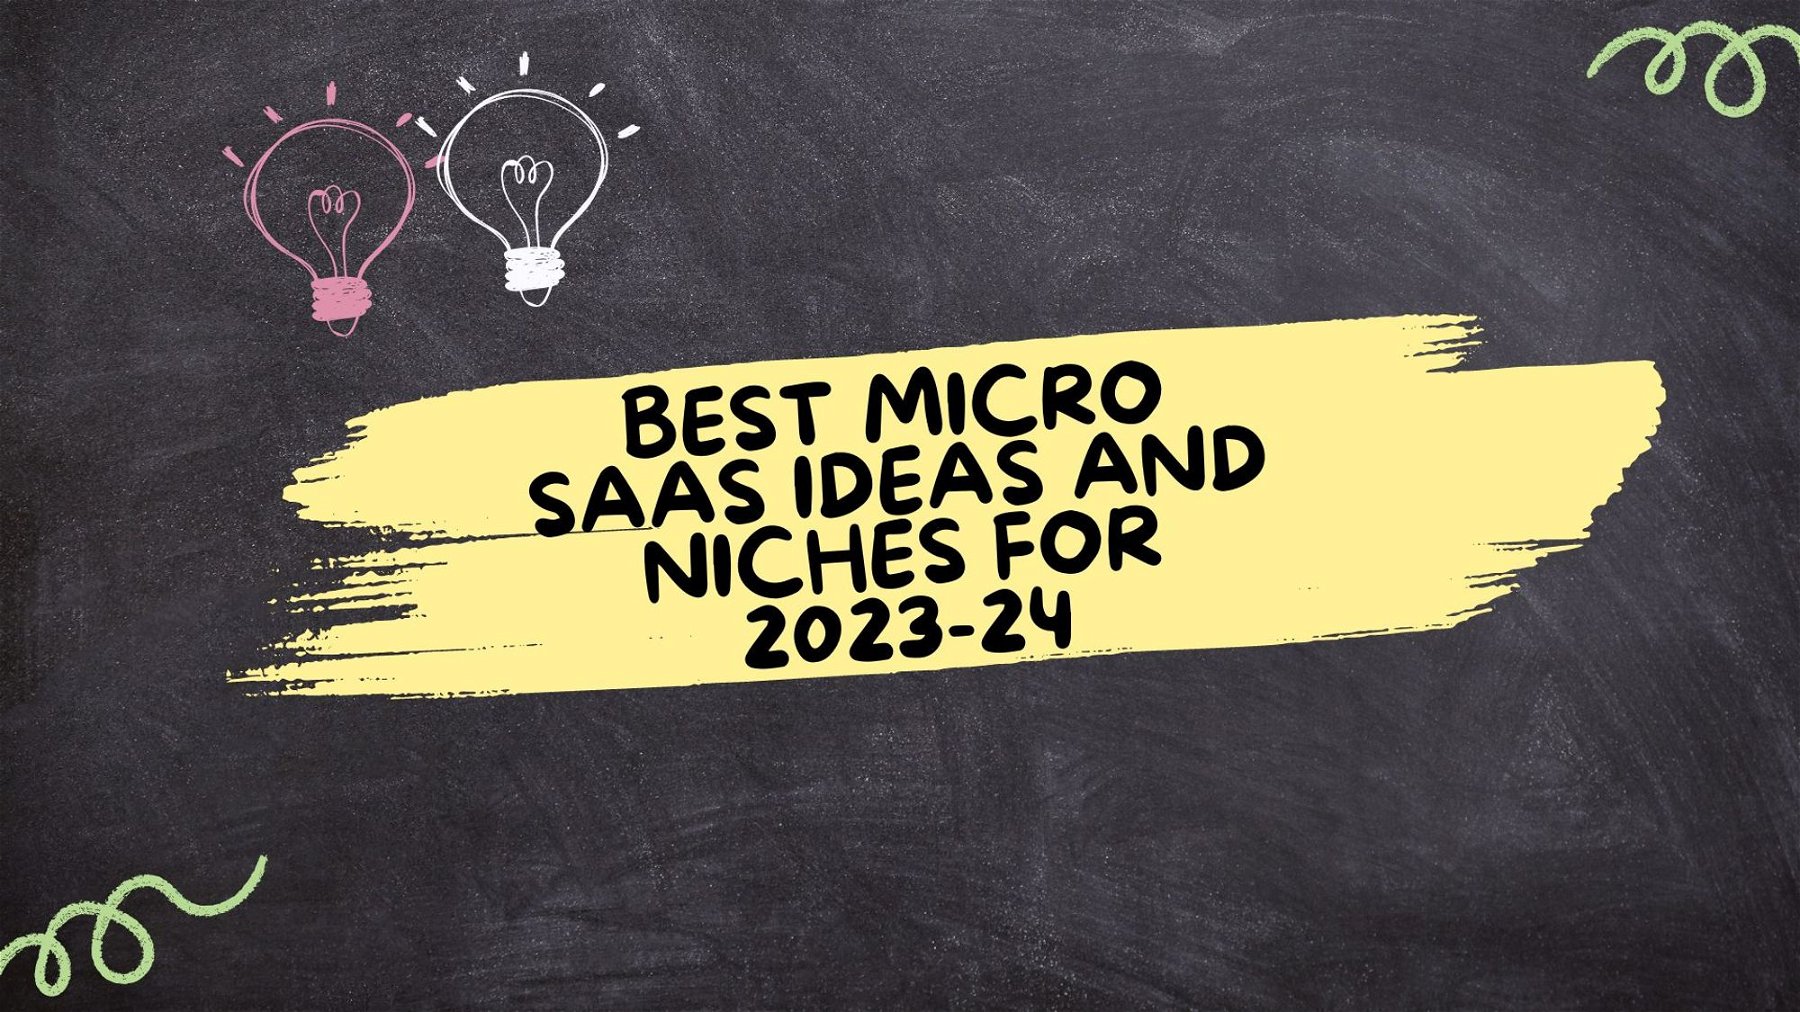 Best Micro SaaS Ideas and Niches for 2023-24